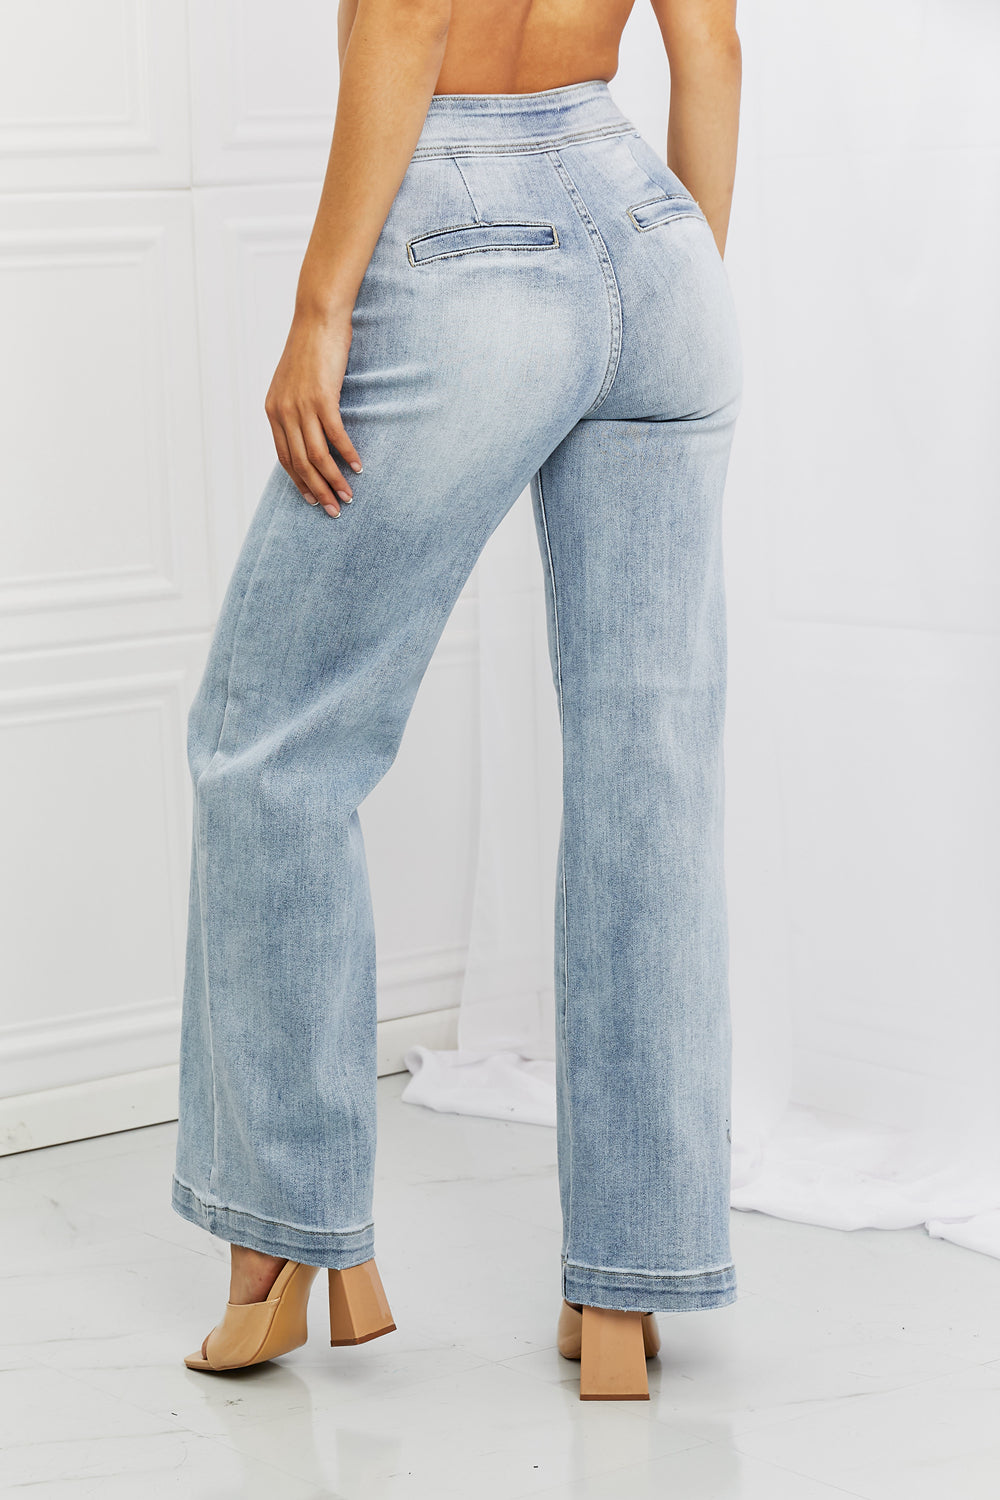 RISEN Full Size Luisa Wide Flare Jeans - Ships from The US - women's jeans at TFC&H Co.